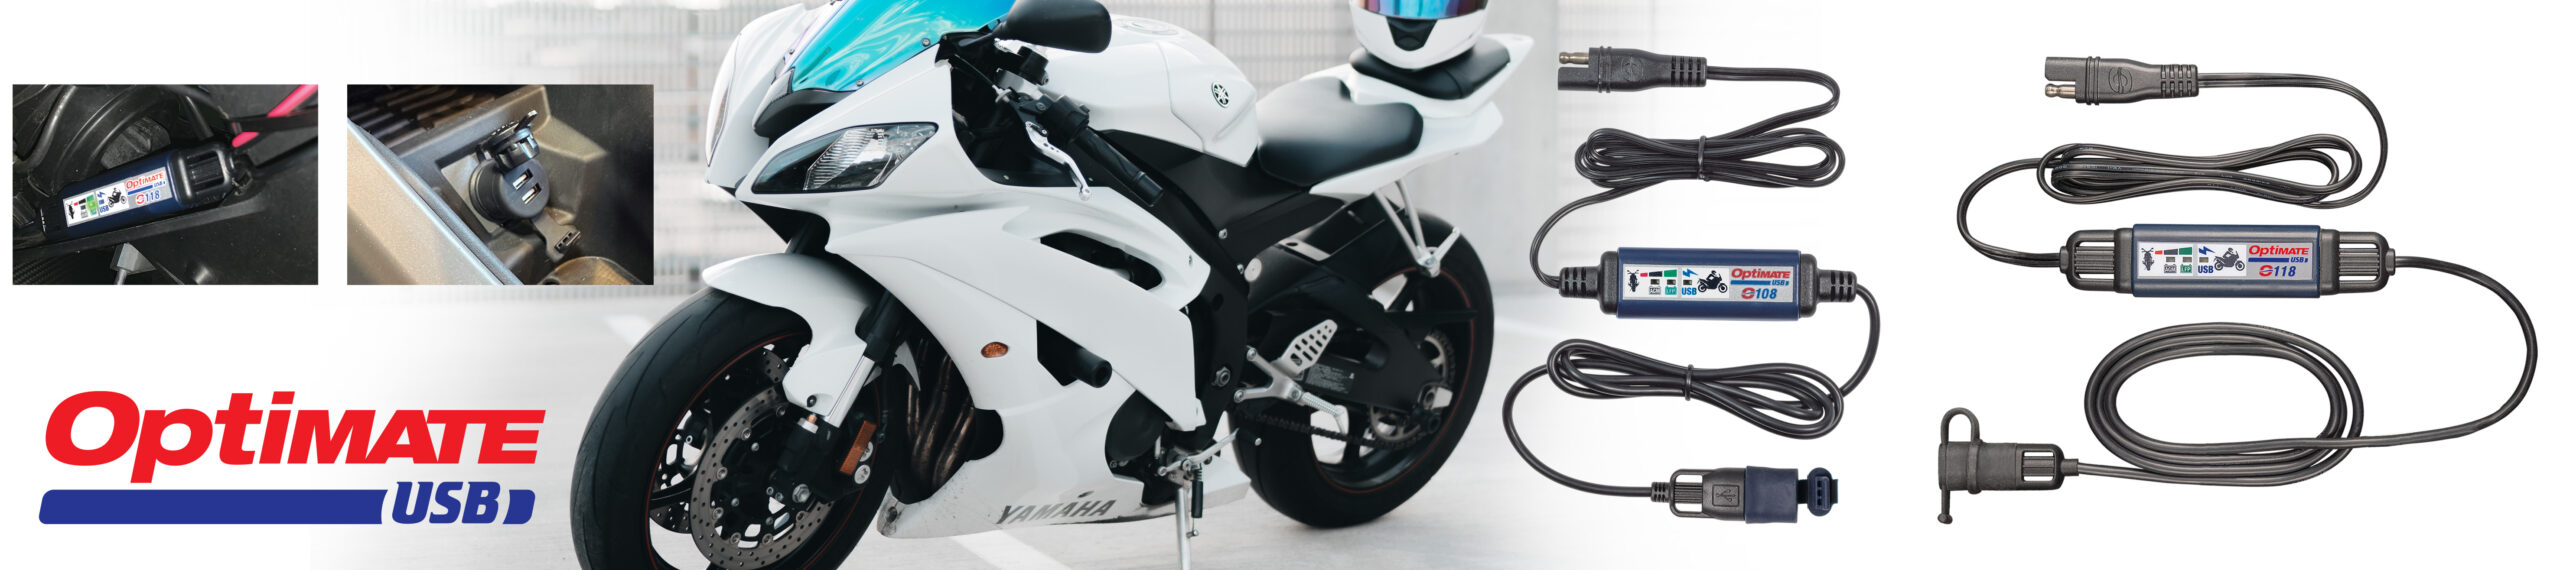 OptiMate USB charger (USB-A & USB-C) for motorcycles